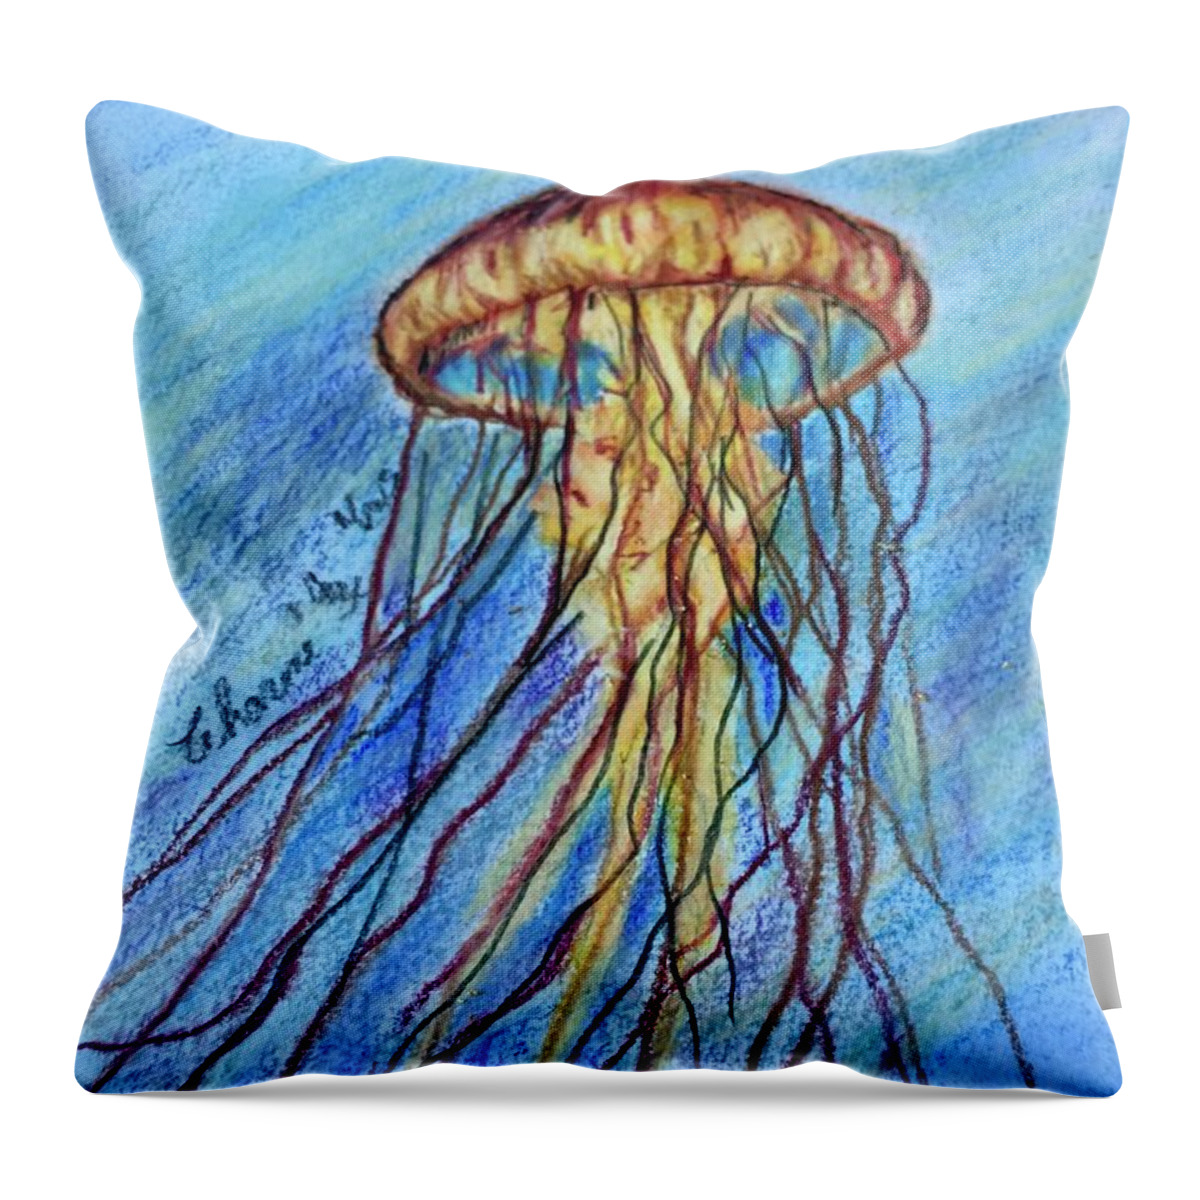 Blues Throw Pillow featuring the drawing Tiny but Big Sting by Charme Curtin